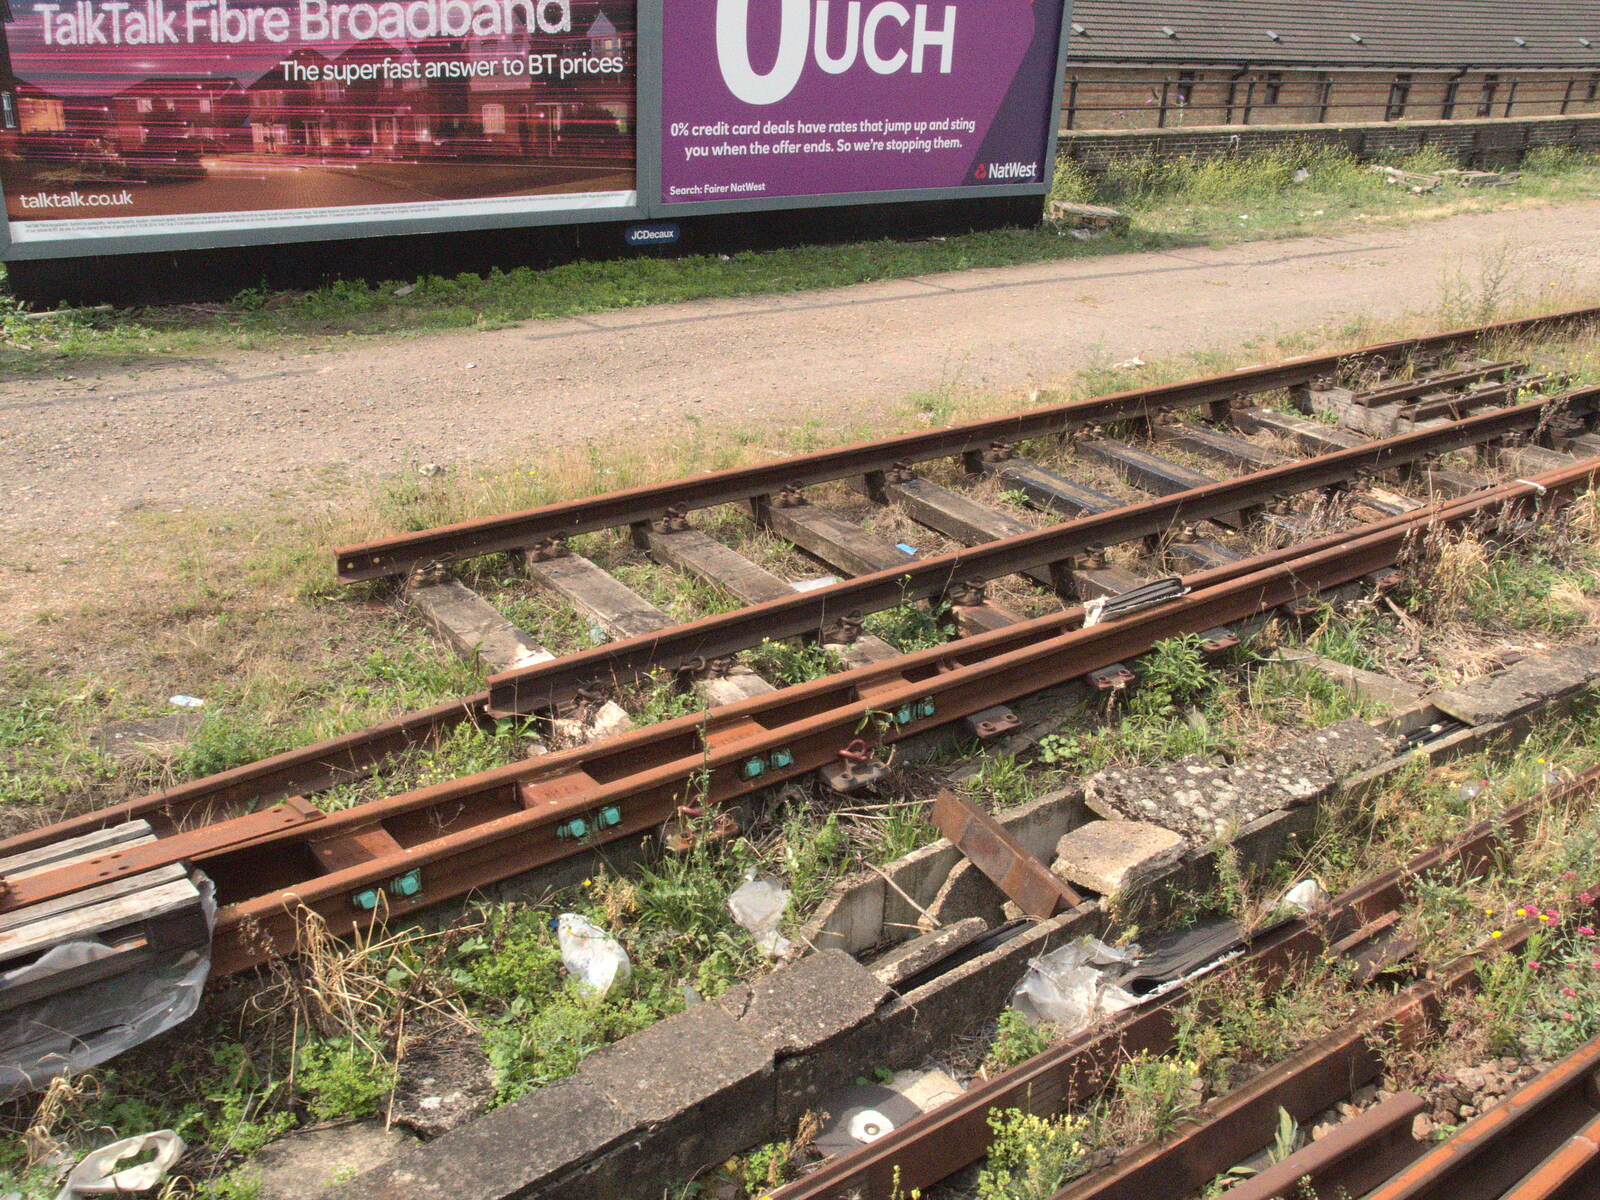 A pile of discarded railway tracks from A Week on the Rails, Stratford and Liverpool Street, London - 23rd July